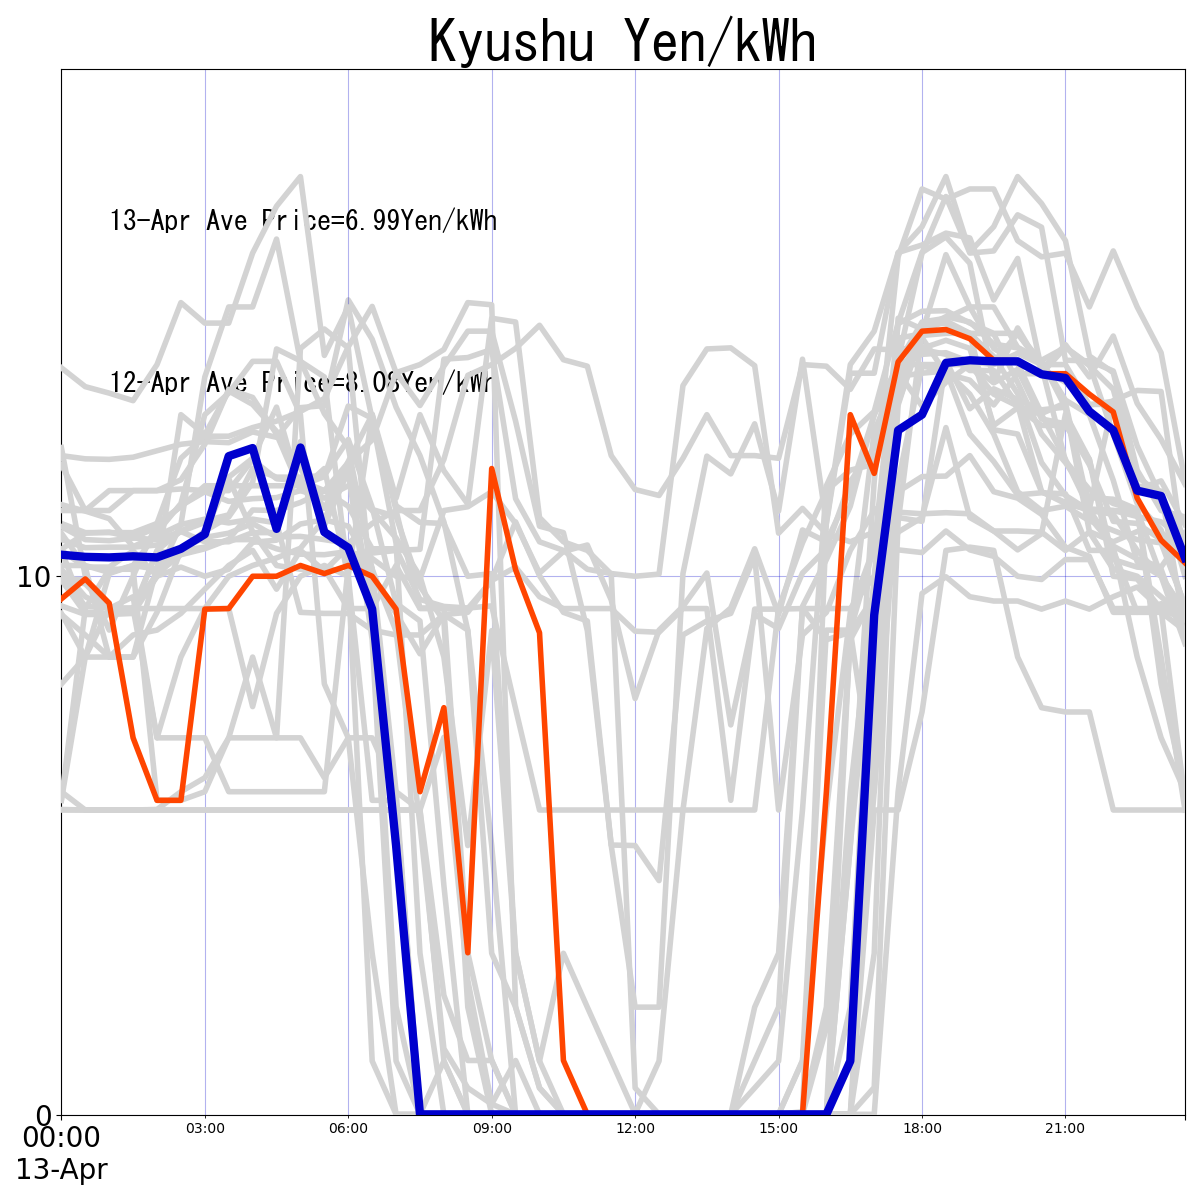 Japanese Electricity JEPX Kyushu Area Price plotted by time period over the last 30 days.